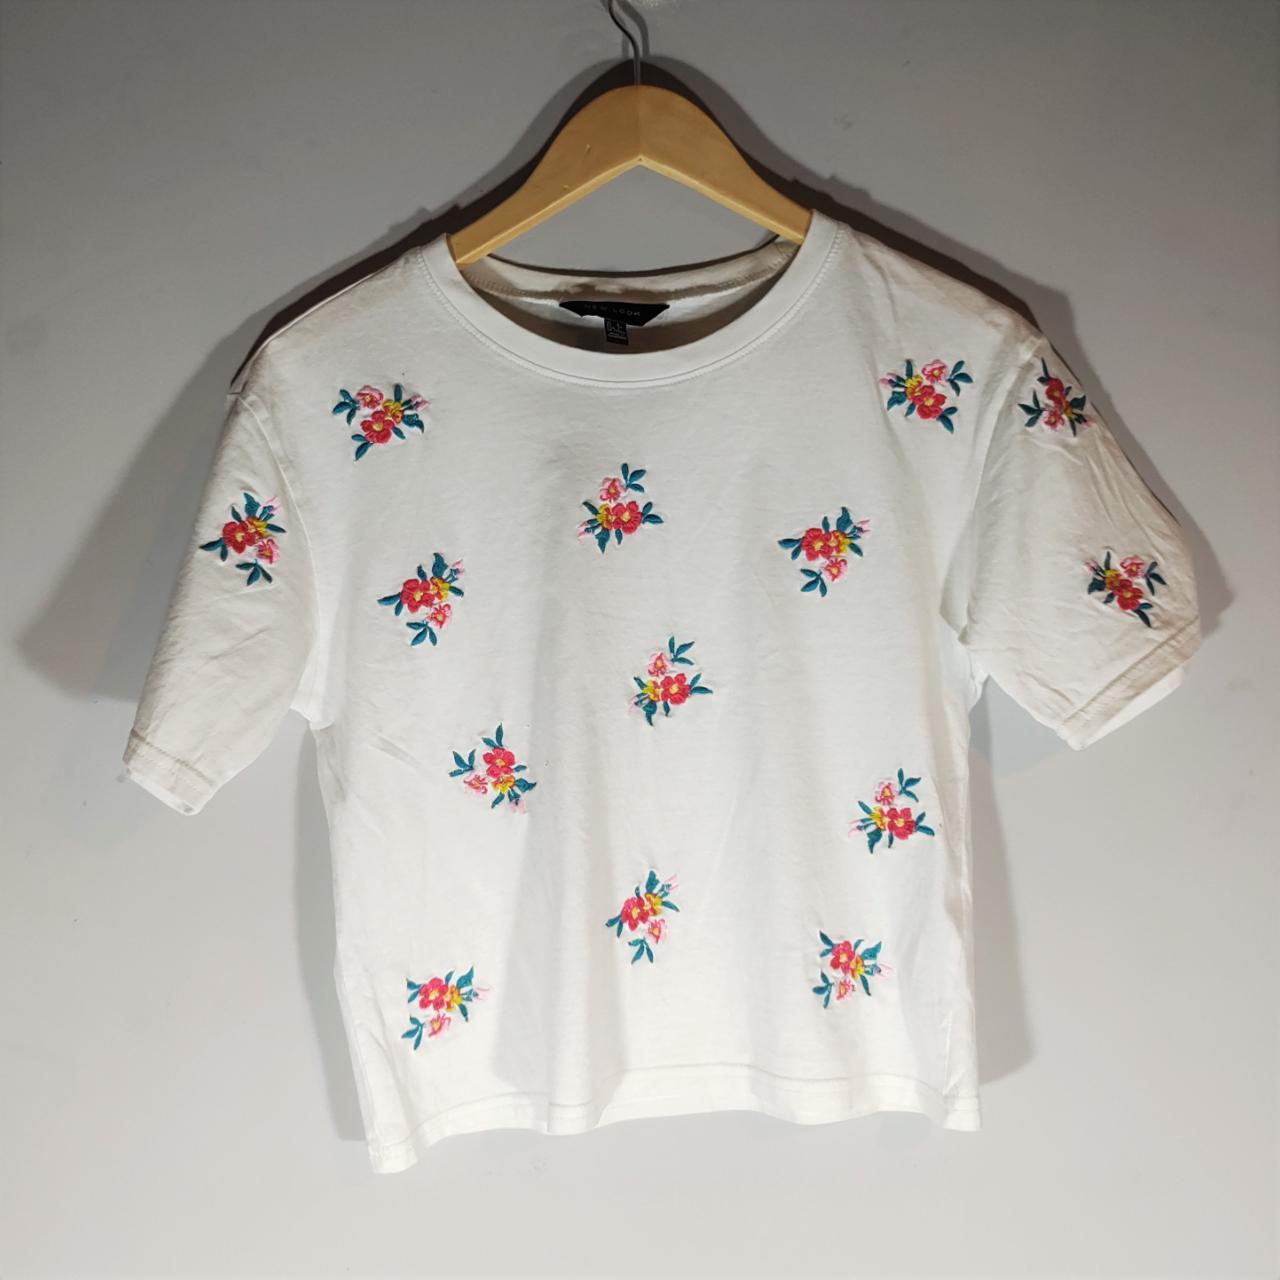 Floral embroidered white t-shirt A basic white... - Depop